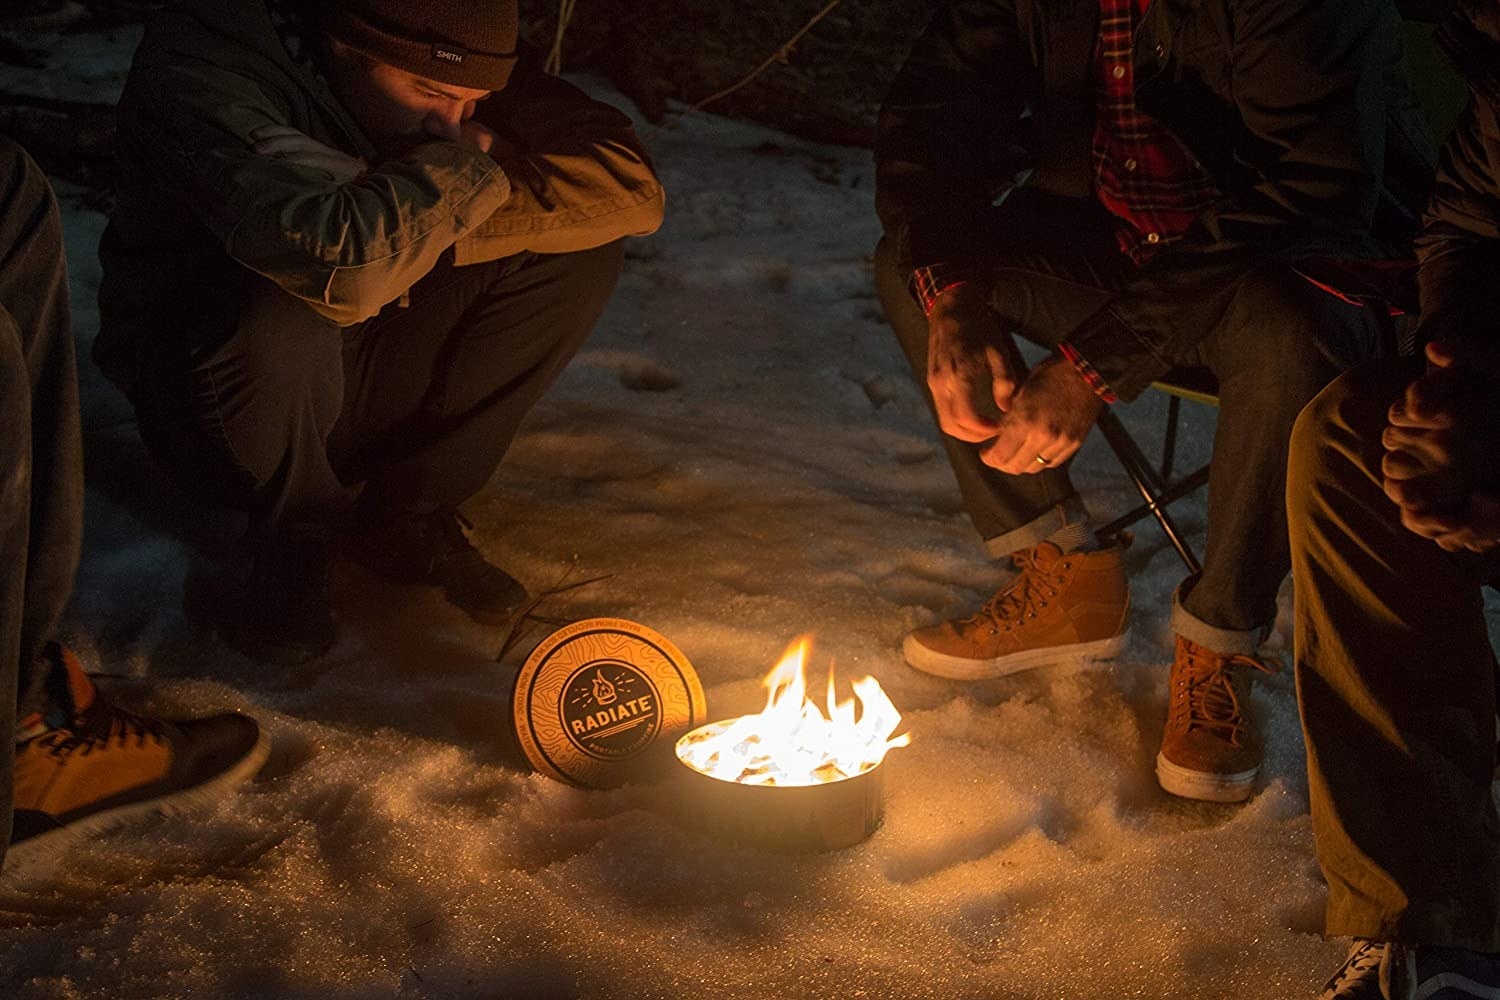 Models sit around a portable campfire